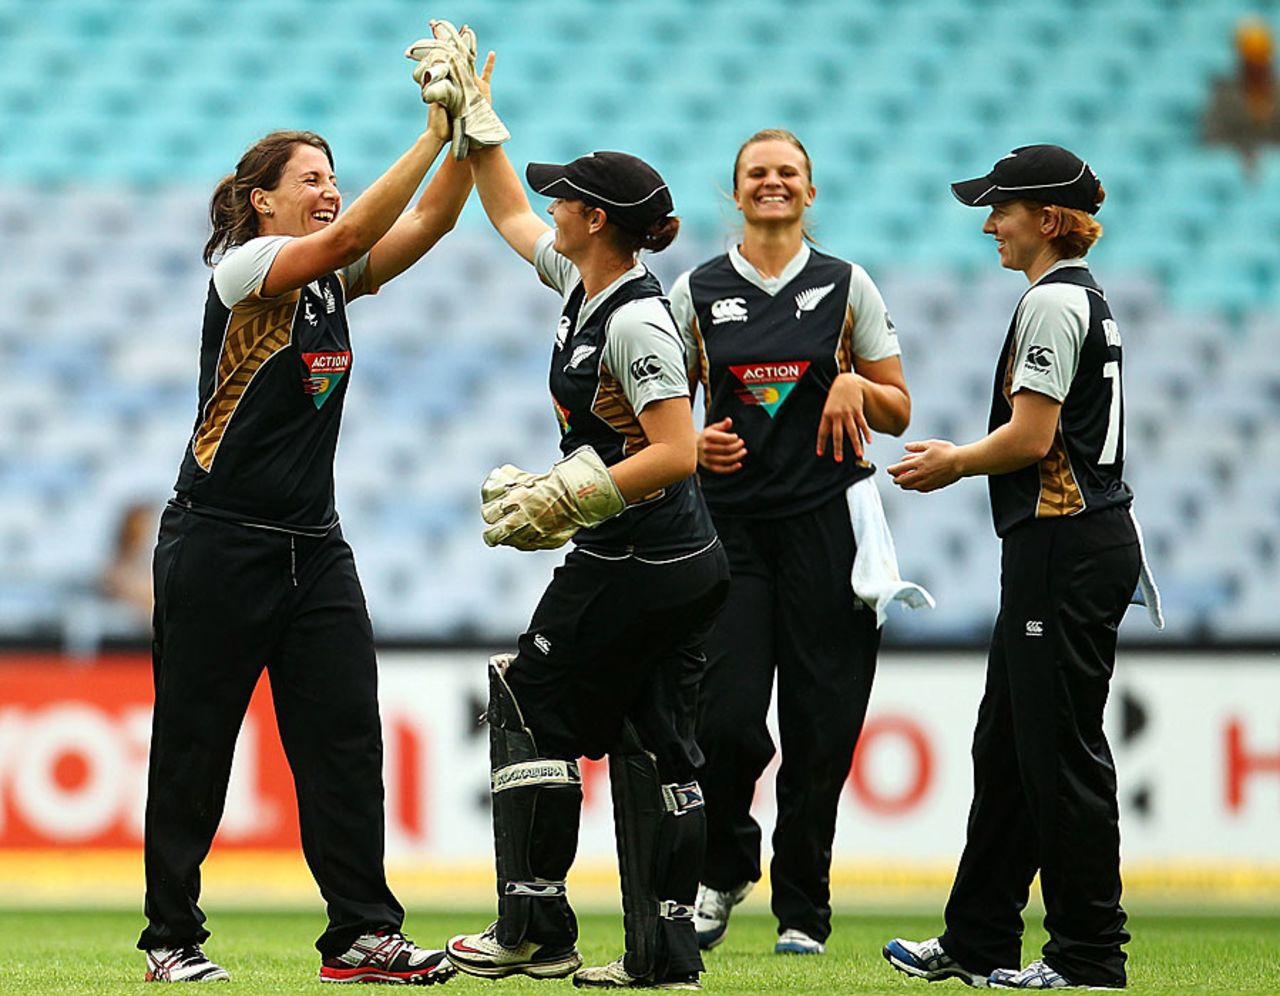 Kate Broadmore picked up 3 for 9 in four overs, Australia v New Zealand, 4th Women's T20, Sydney, February 1, 2012